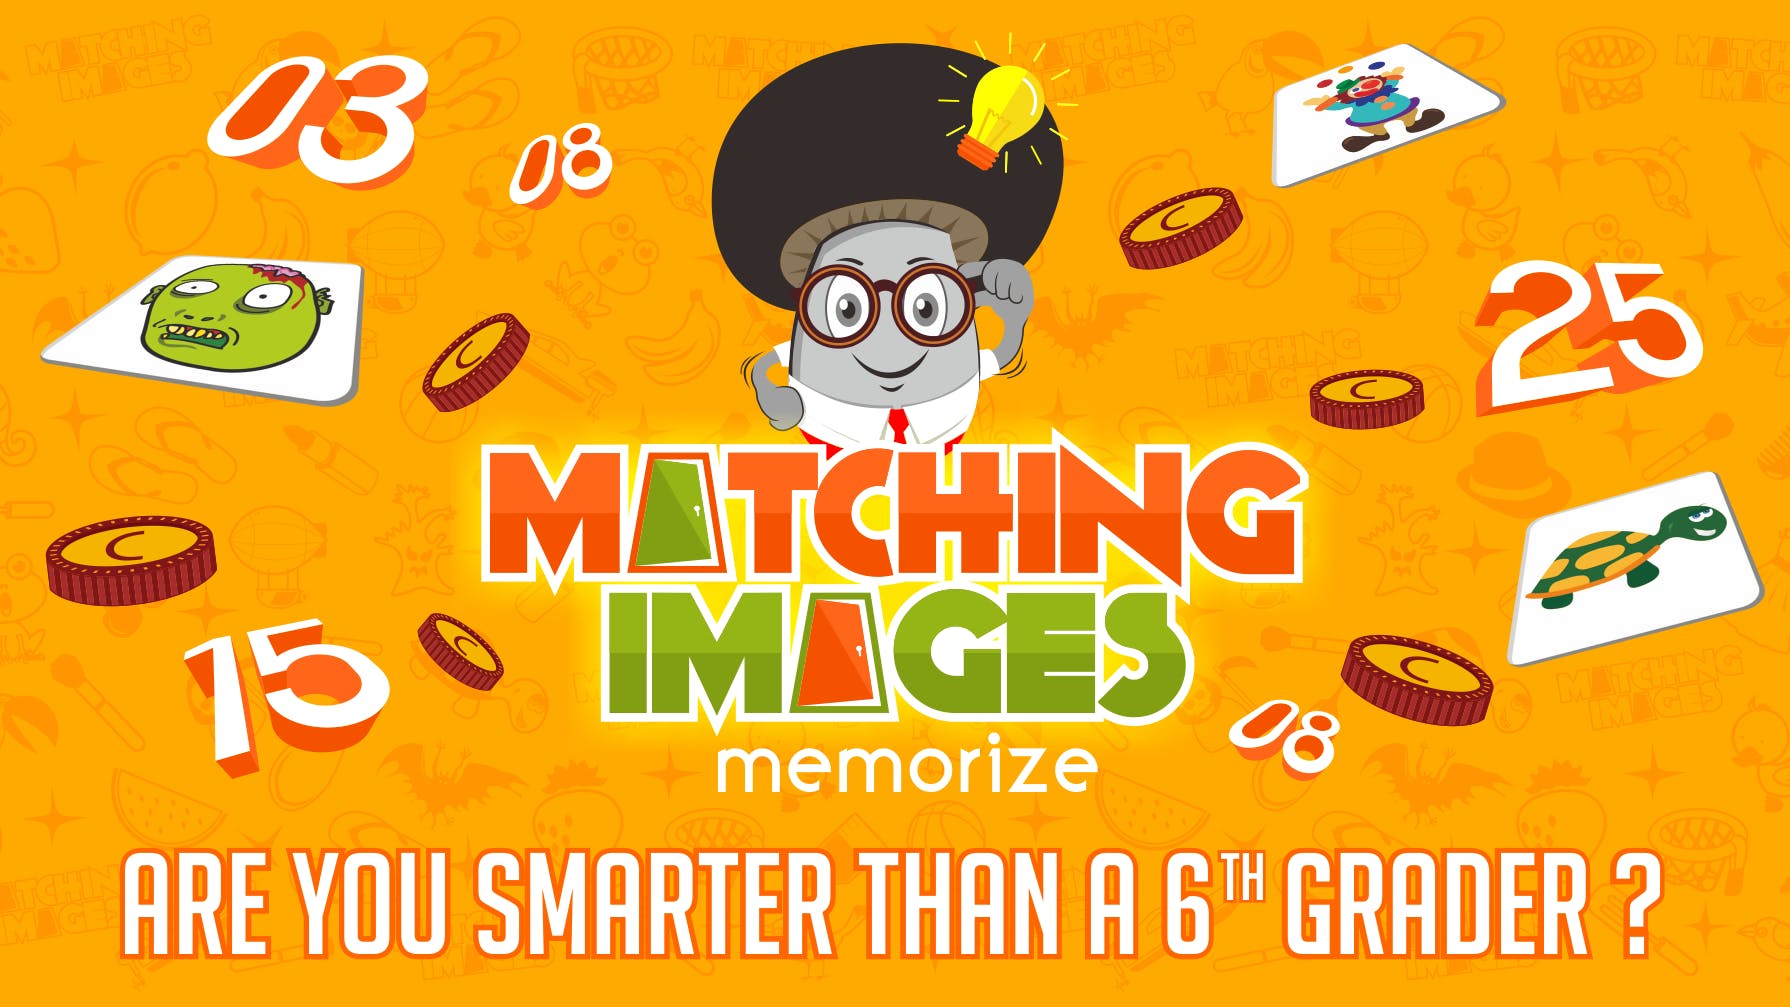 Matching Images media 1